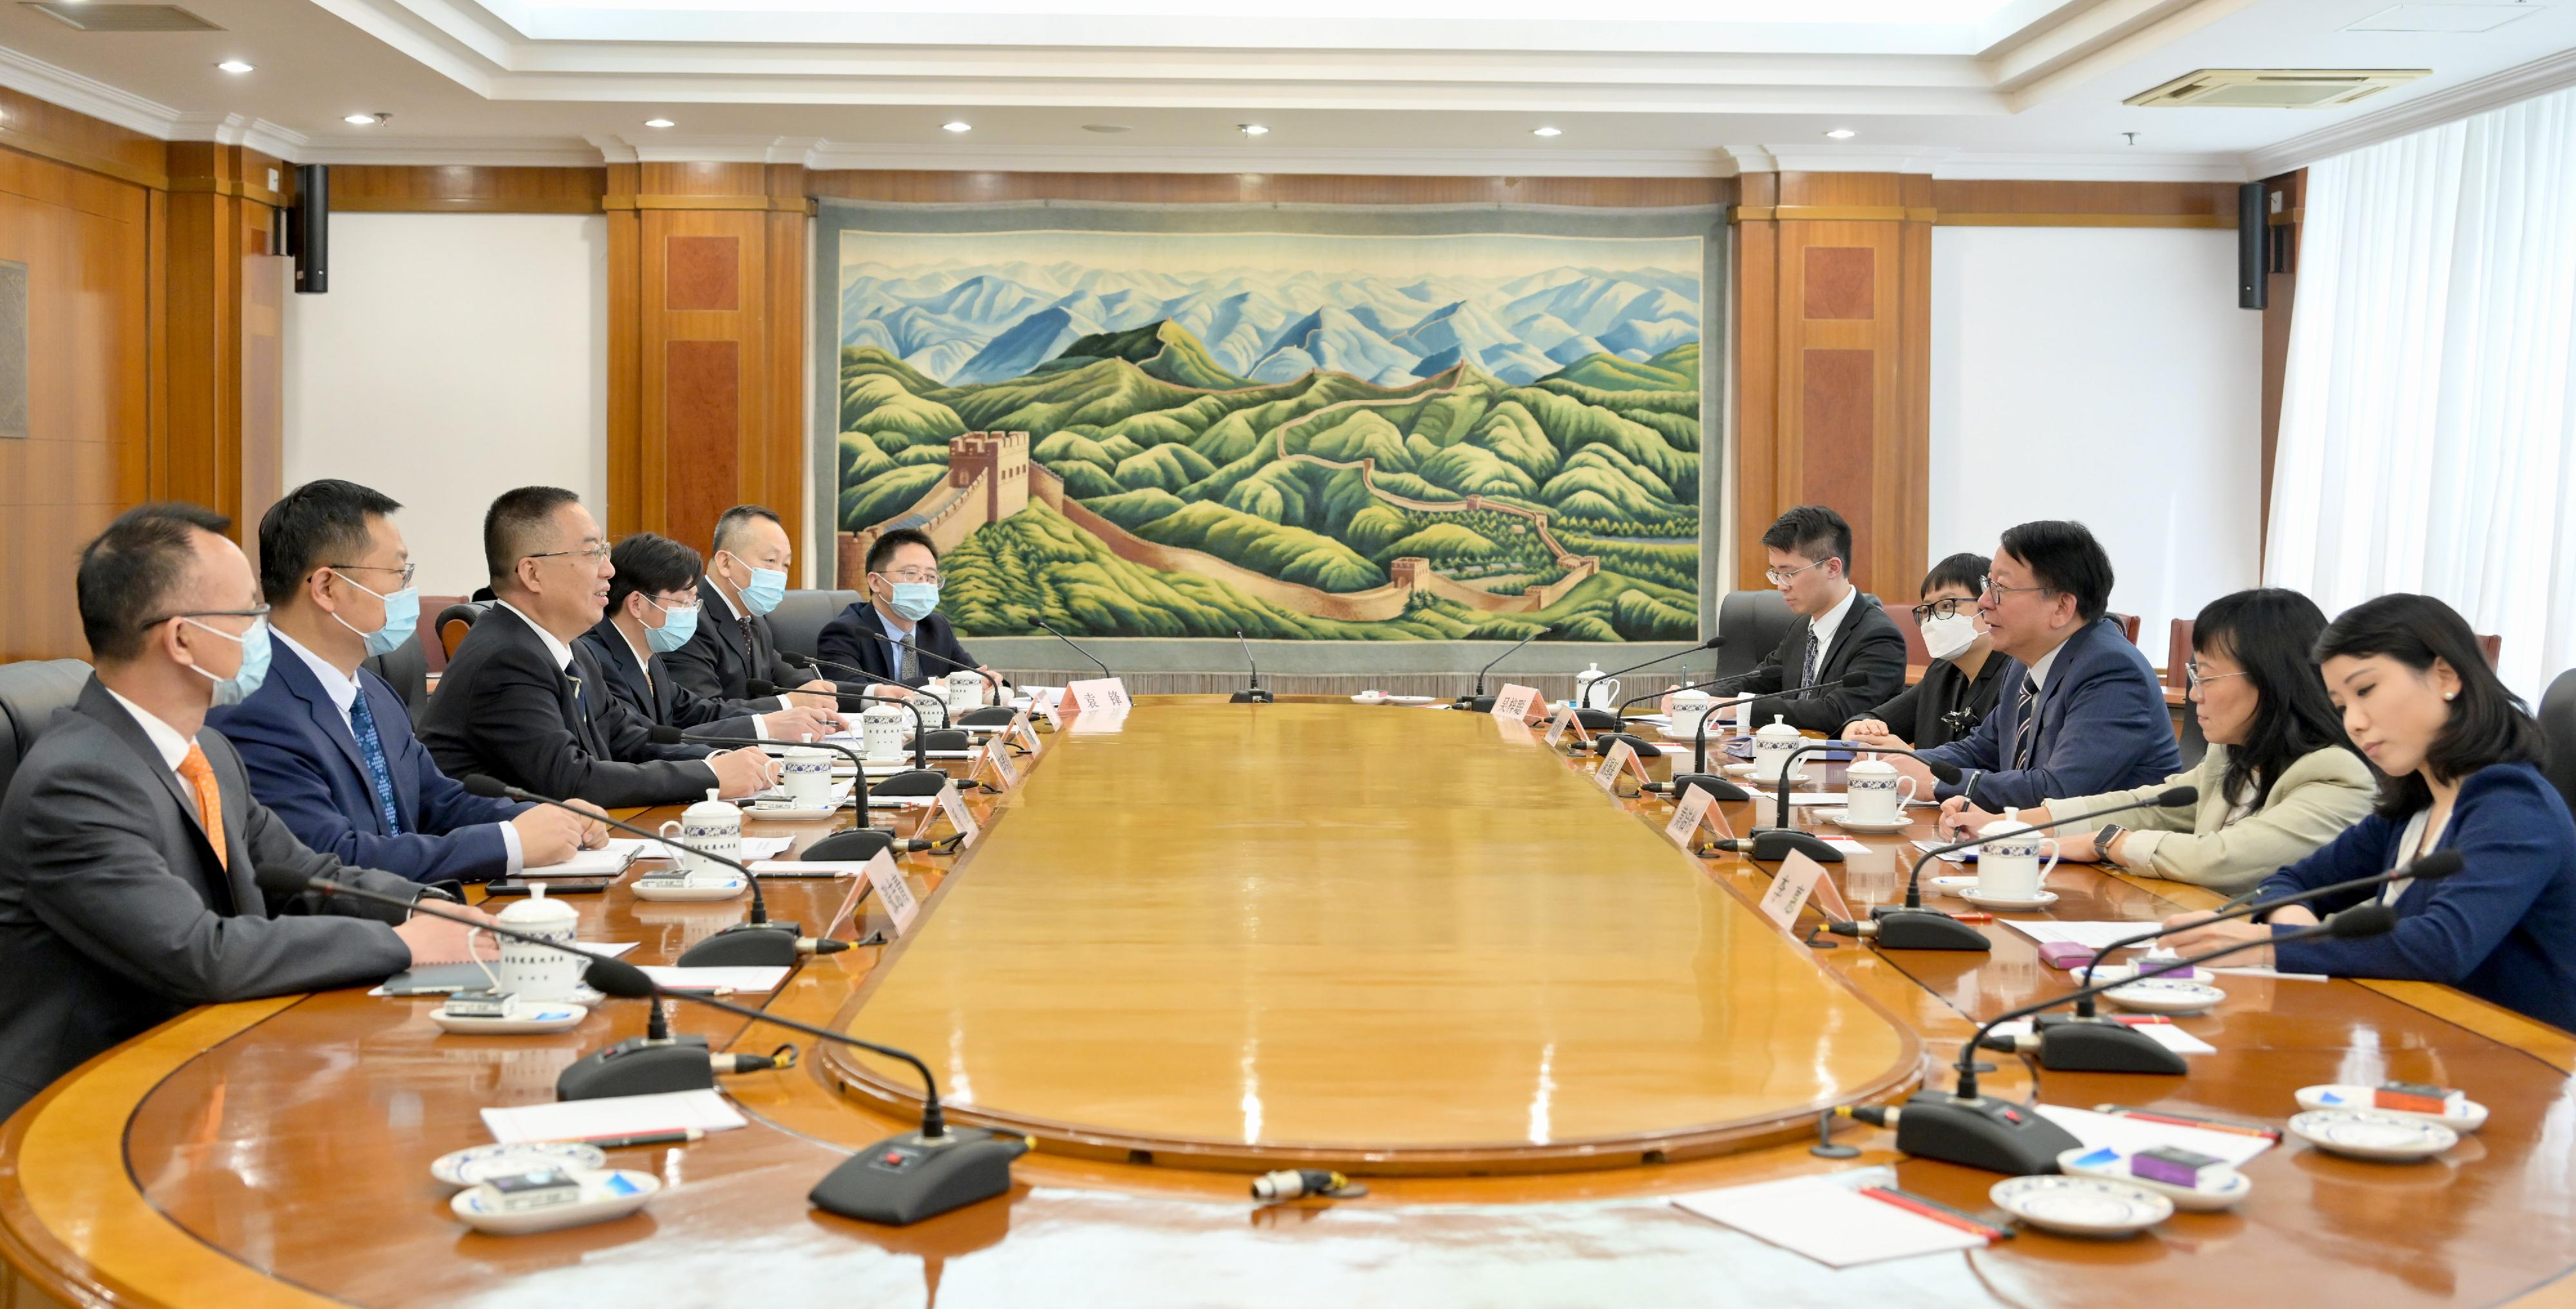 The Chief Secretary for Administration, Mr Chan Kwok-ki (third right), meets with Vice Chairman of the National Development and Reform Commission Mr Li Chunlin (third left) in Beijing today (April 28). Also attending the meeting is the Deputy Director of the Office of the Government of the Hong Kong Special Administrative Region in Beijing, Miss Amy Yuen (fourth right).